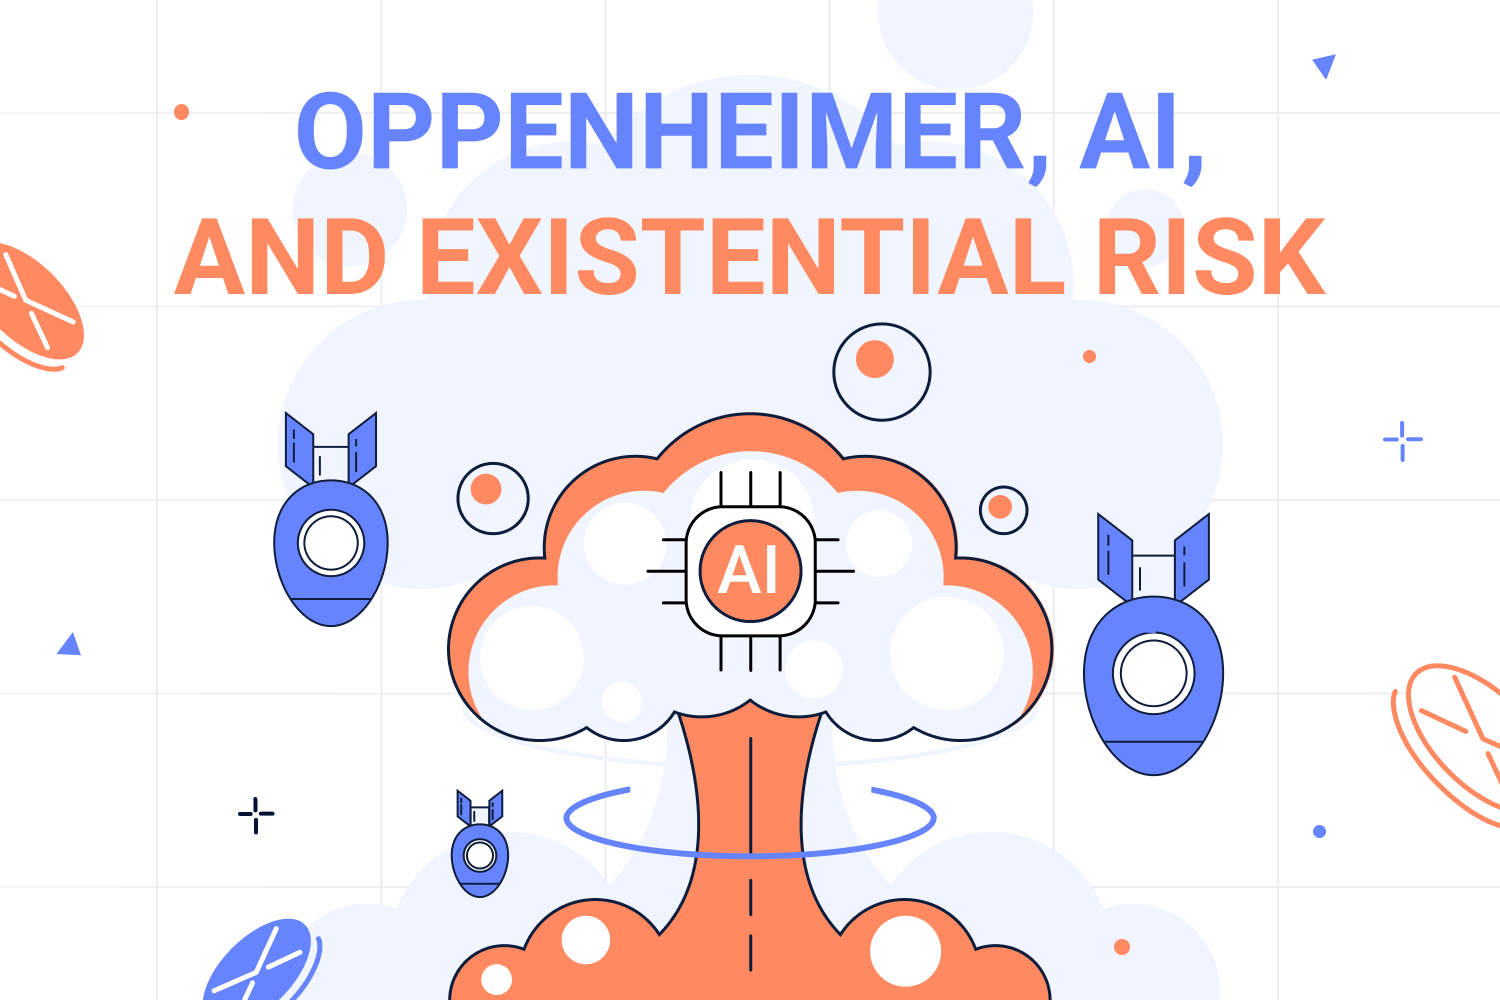 Oppenheimer, AI, And Existential Risk